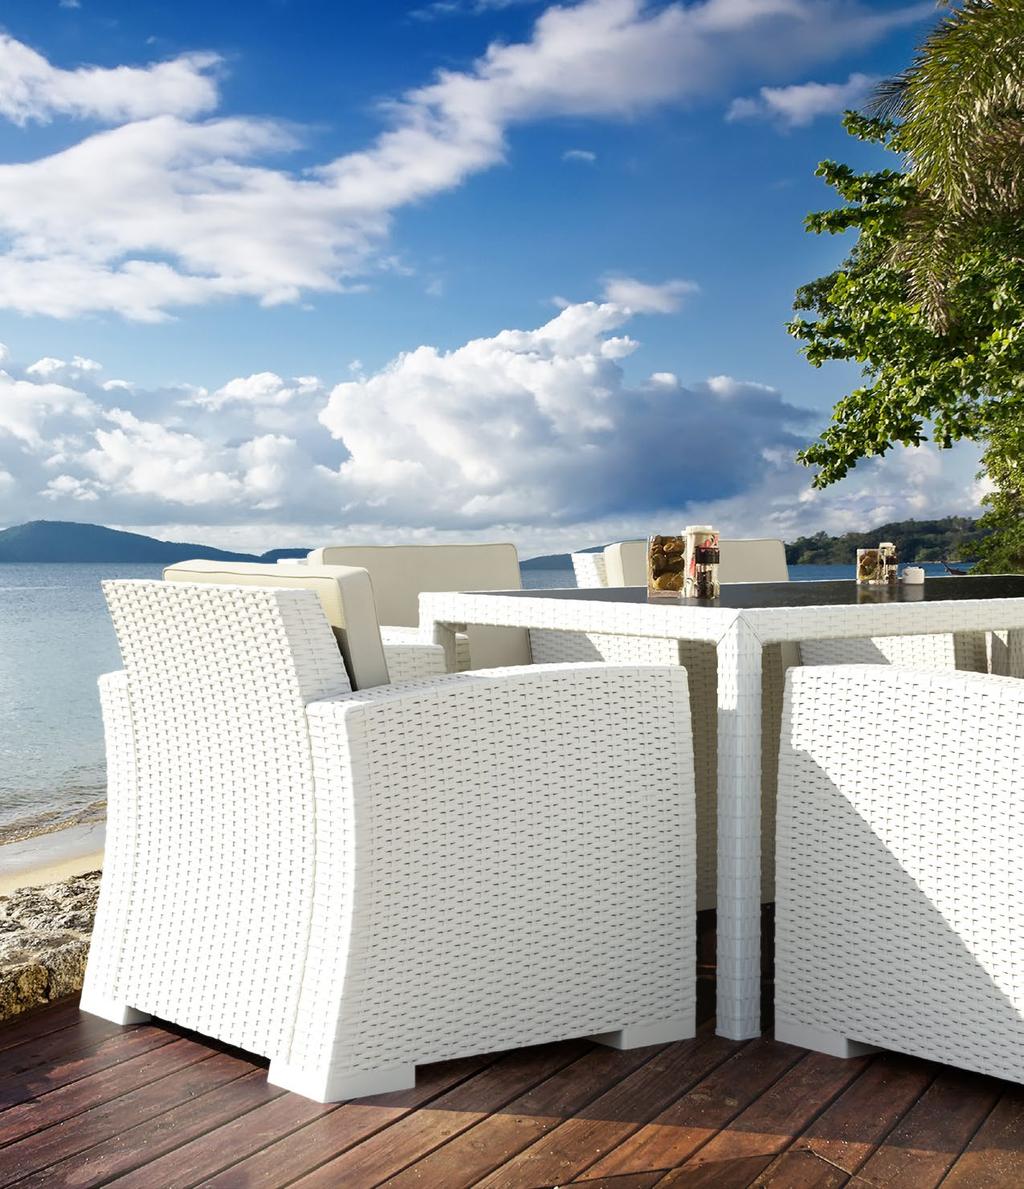 As an experienced manufacturer and exporter Siesta introduces the never-unraveling or fraying high quality wicker furniture. The natural looking and open weave design is available in various colours.